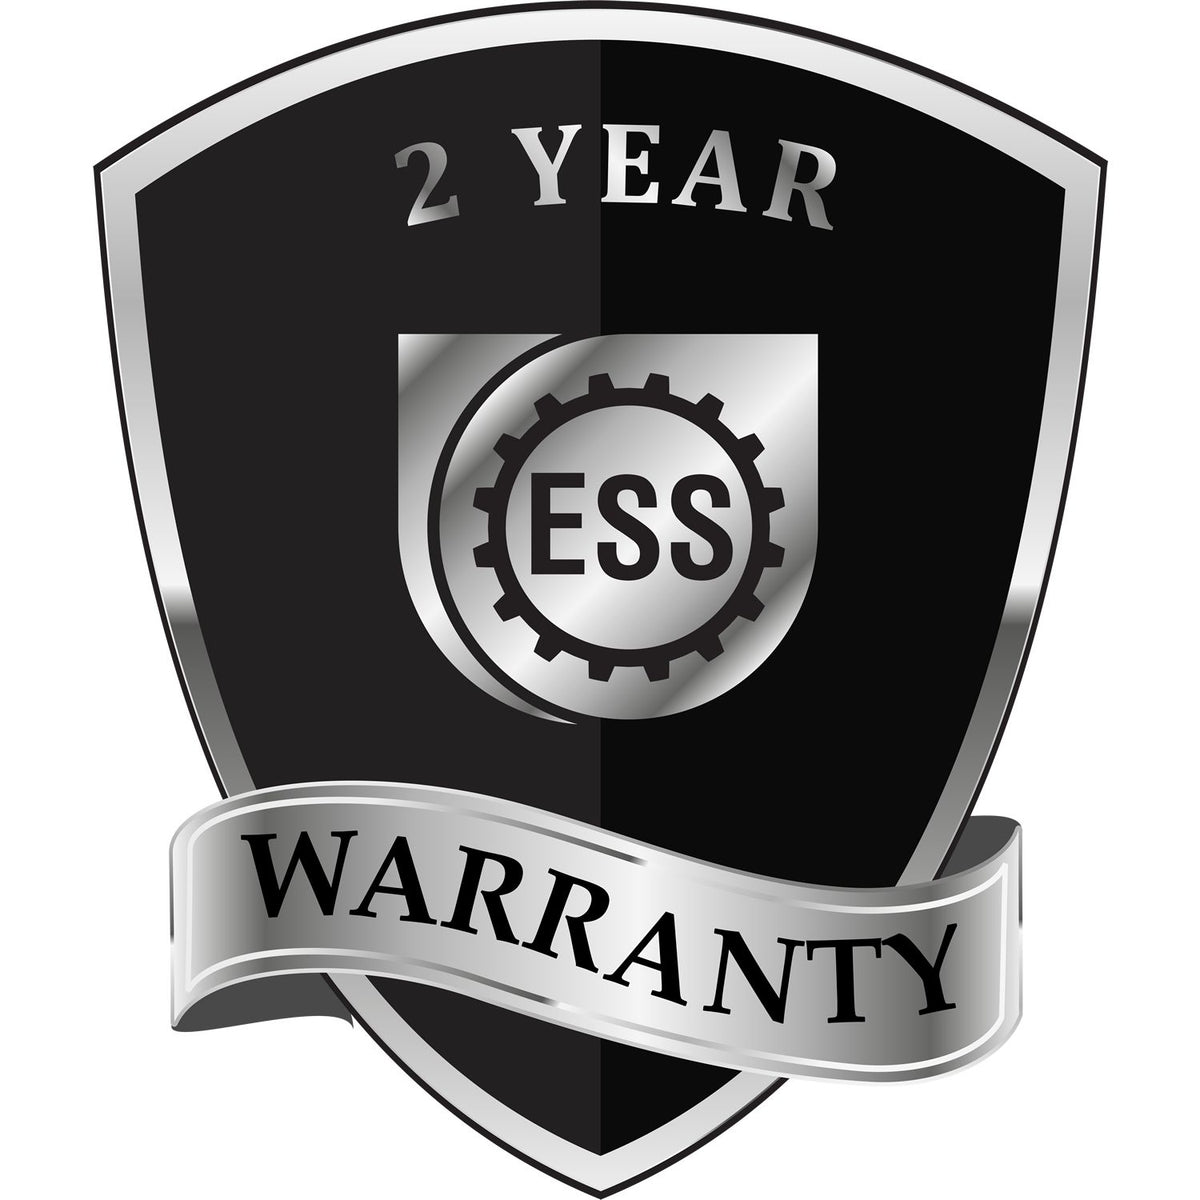 A badge or emblem showing a warranty icon for the State of Kansas Extended Long Reach Engineer Seal